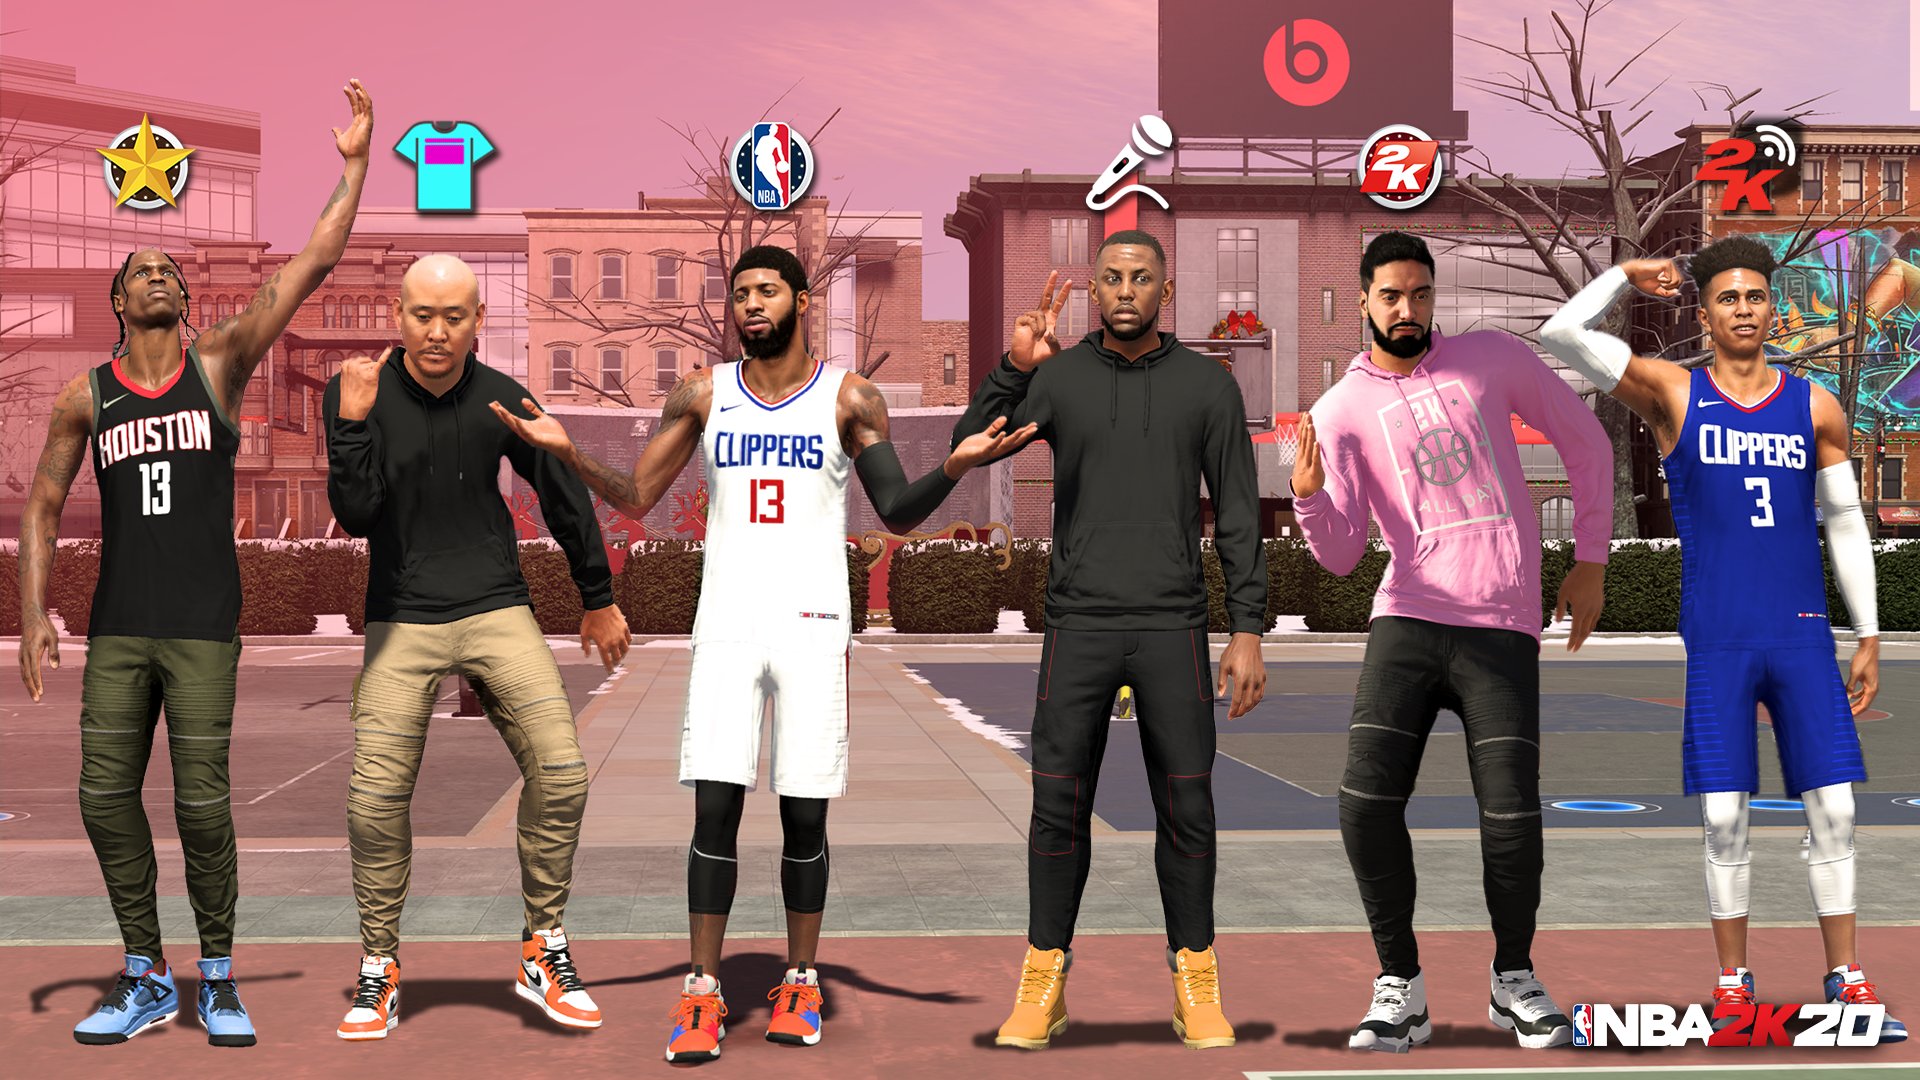 NFL players get footballs above their heads in park  rNBA2k